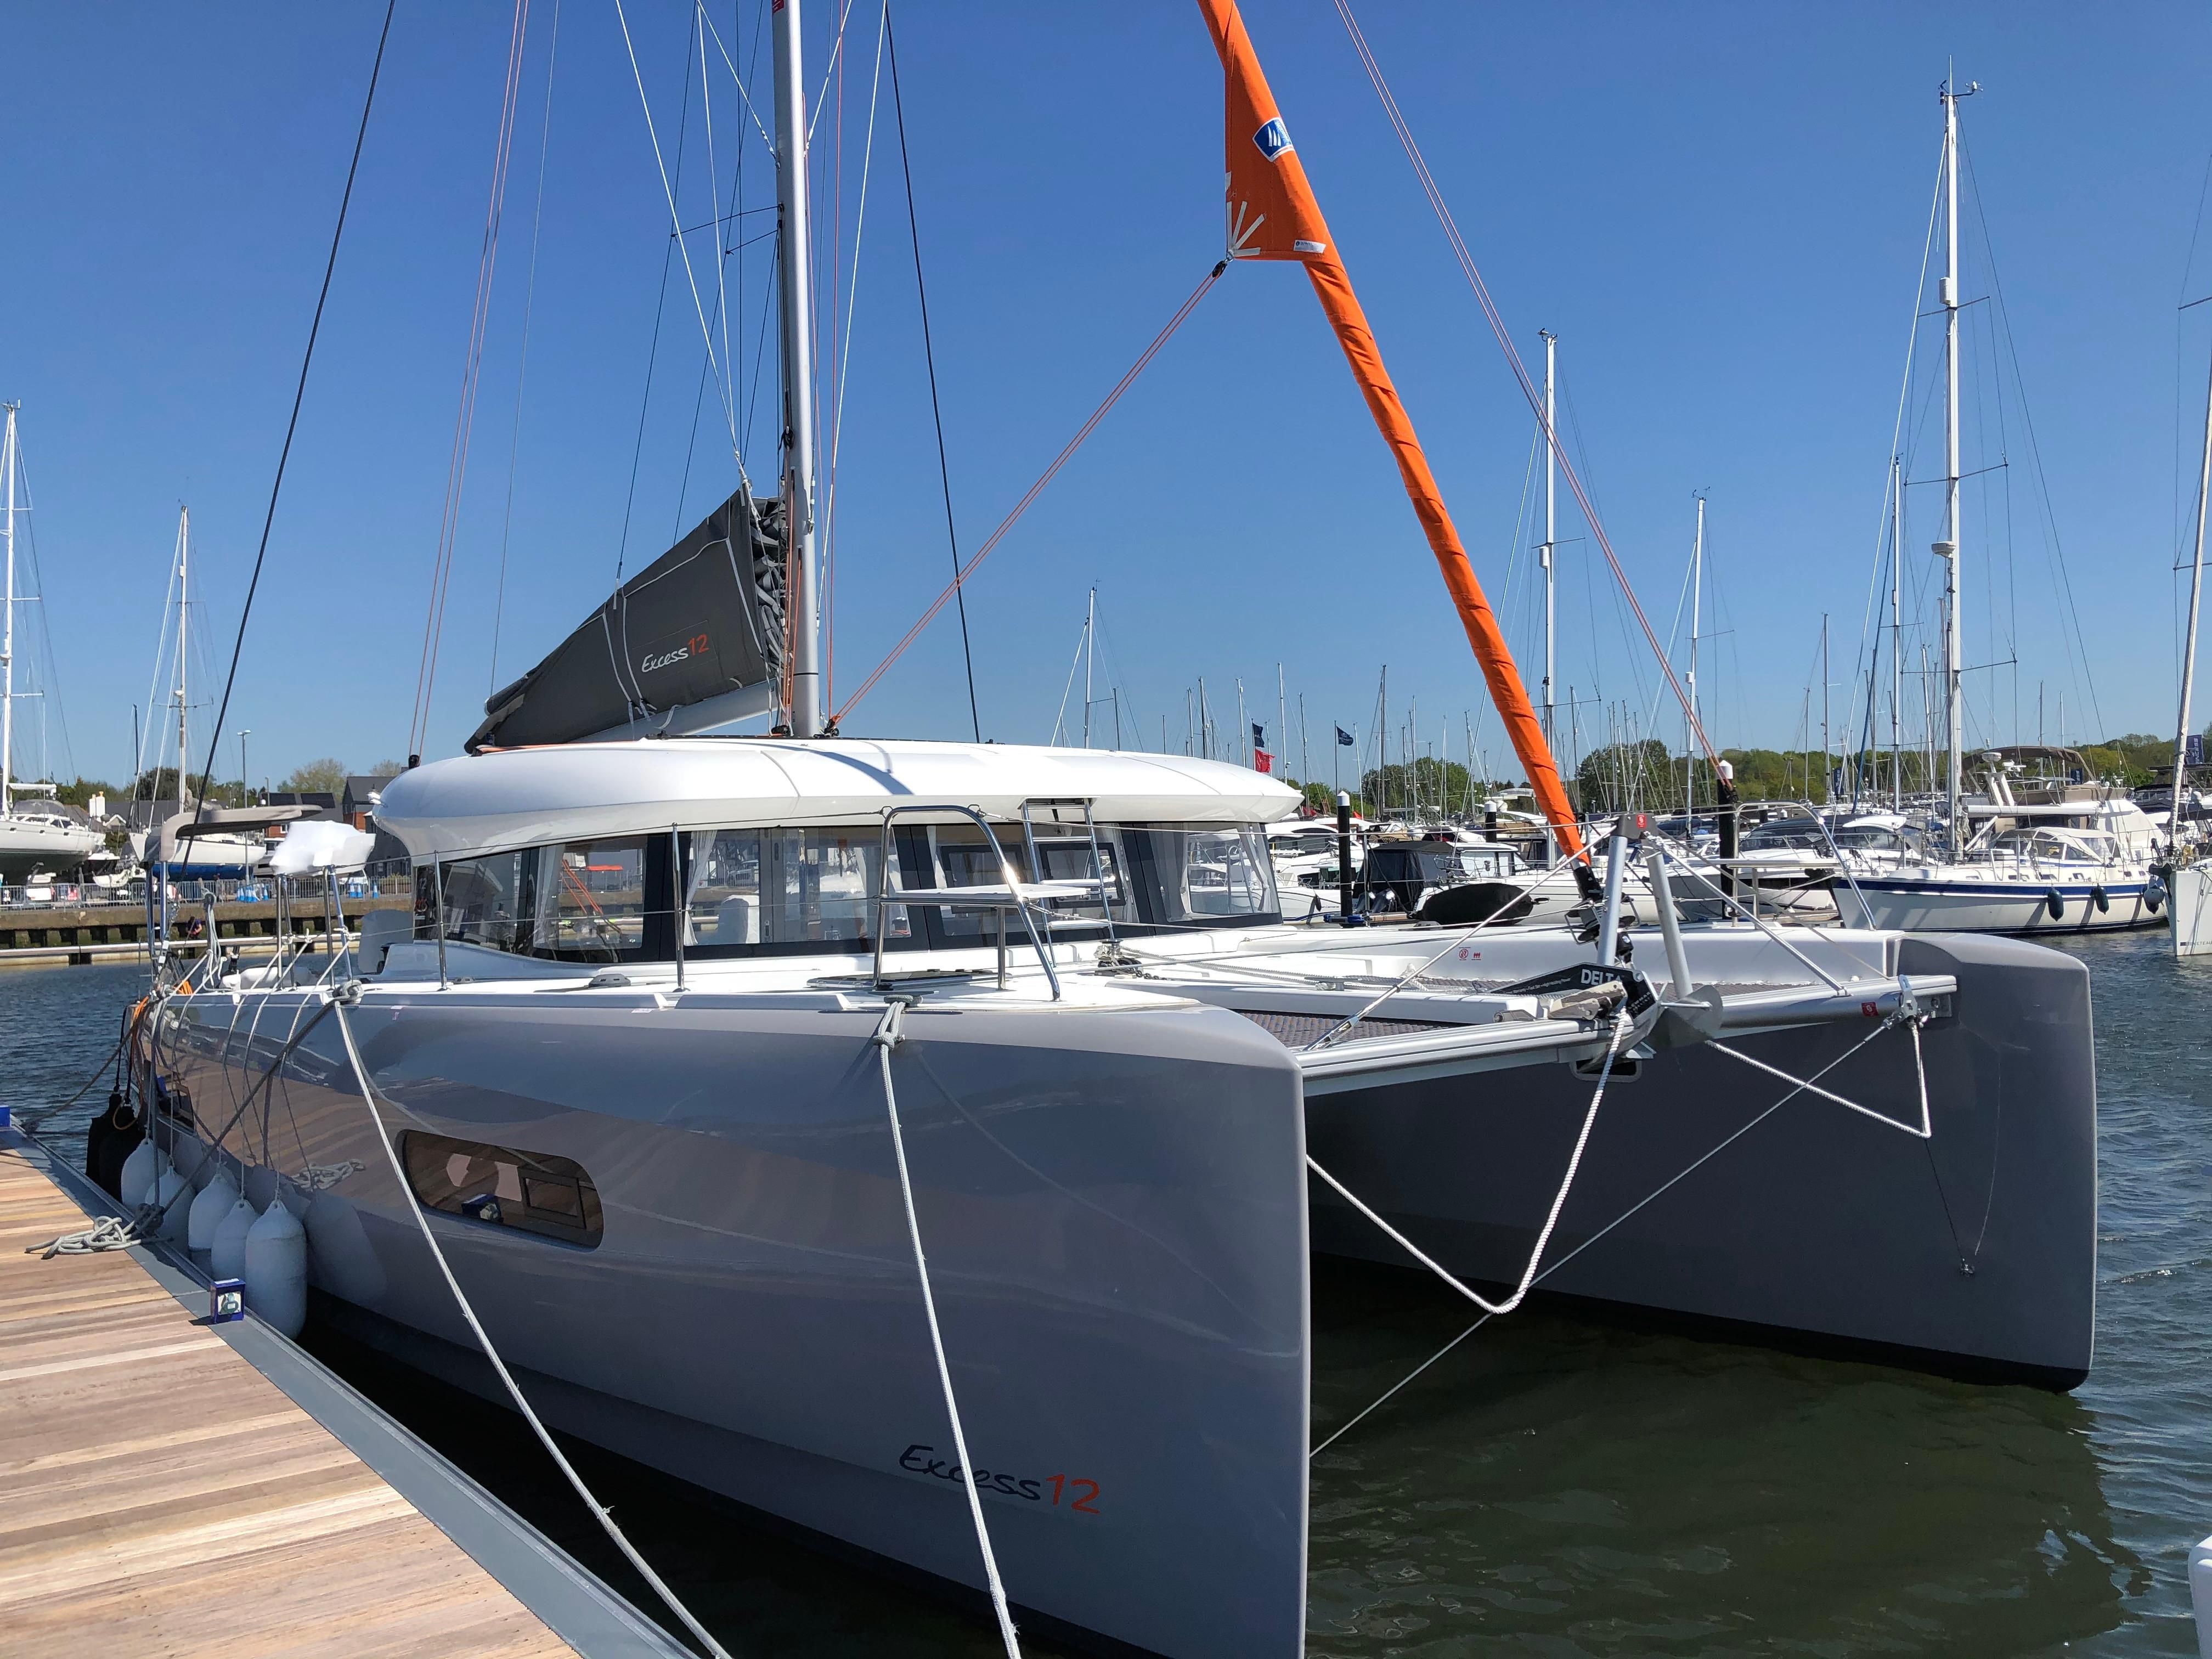 2020 Excess 12 Catamaran For Sale Yachtworld